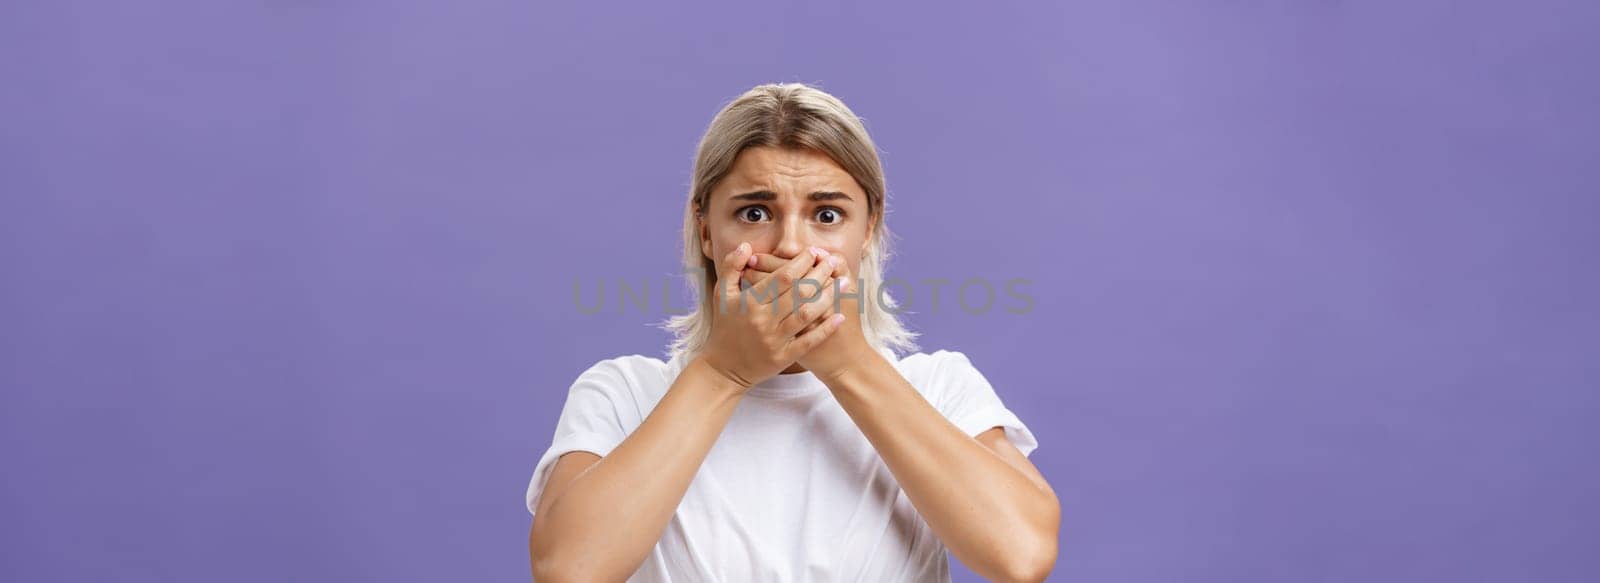 Waist-up shot of shocked nervous and scared young woman witnessing terrible crime covering mouth with both hands not to scream frowning staring frightened at camera over purple background. Emotions concept